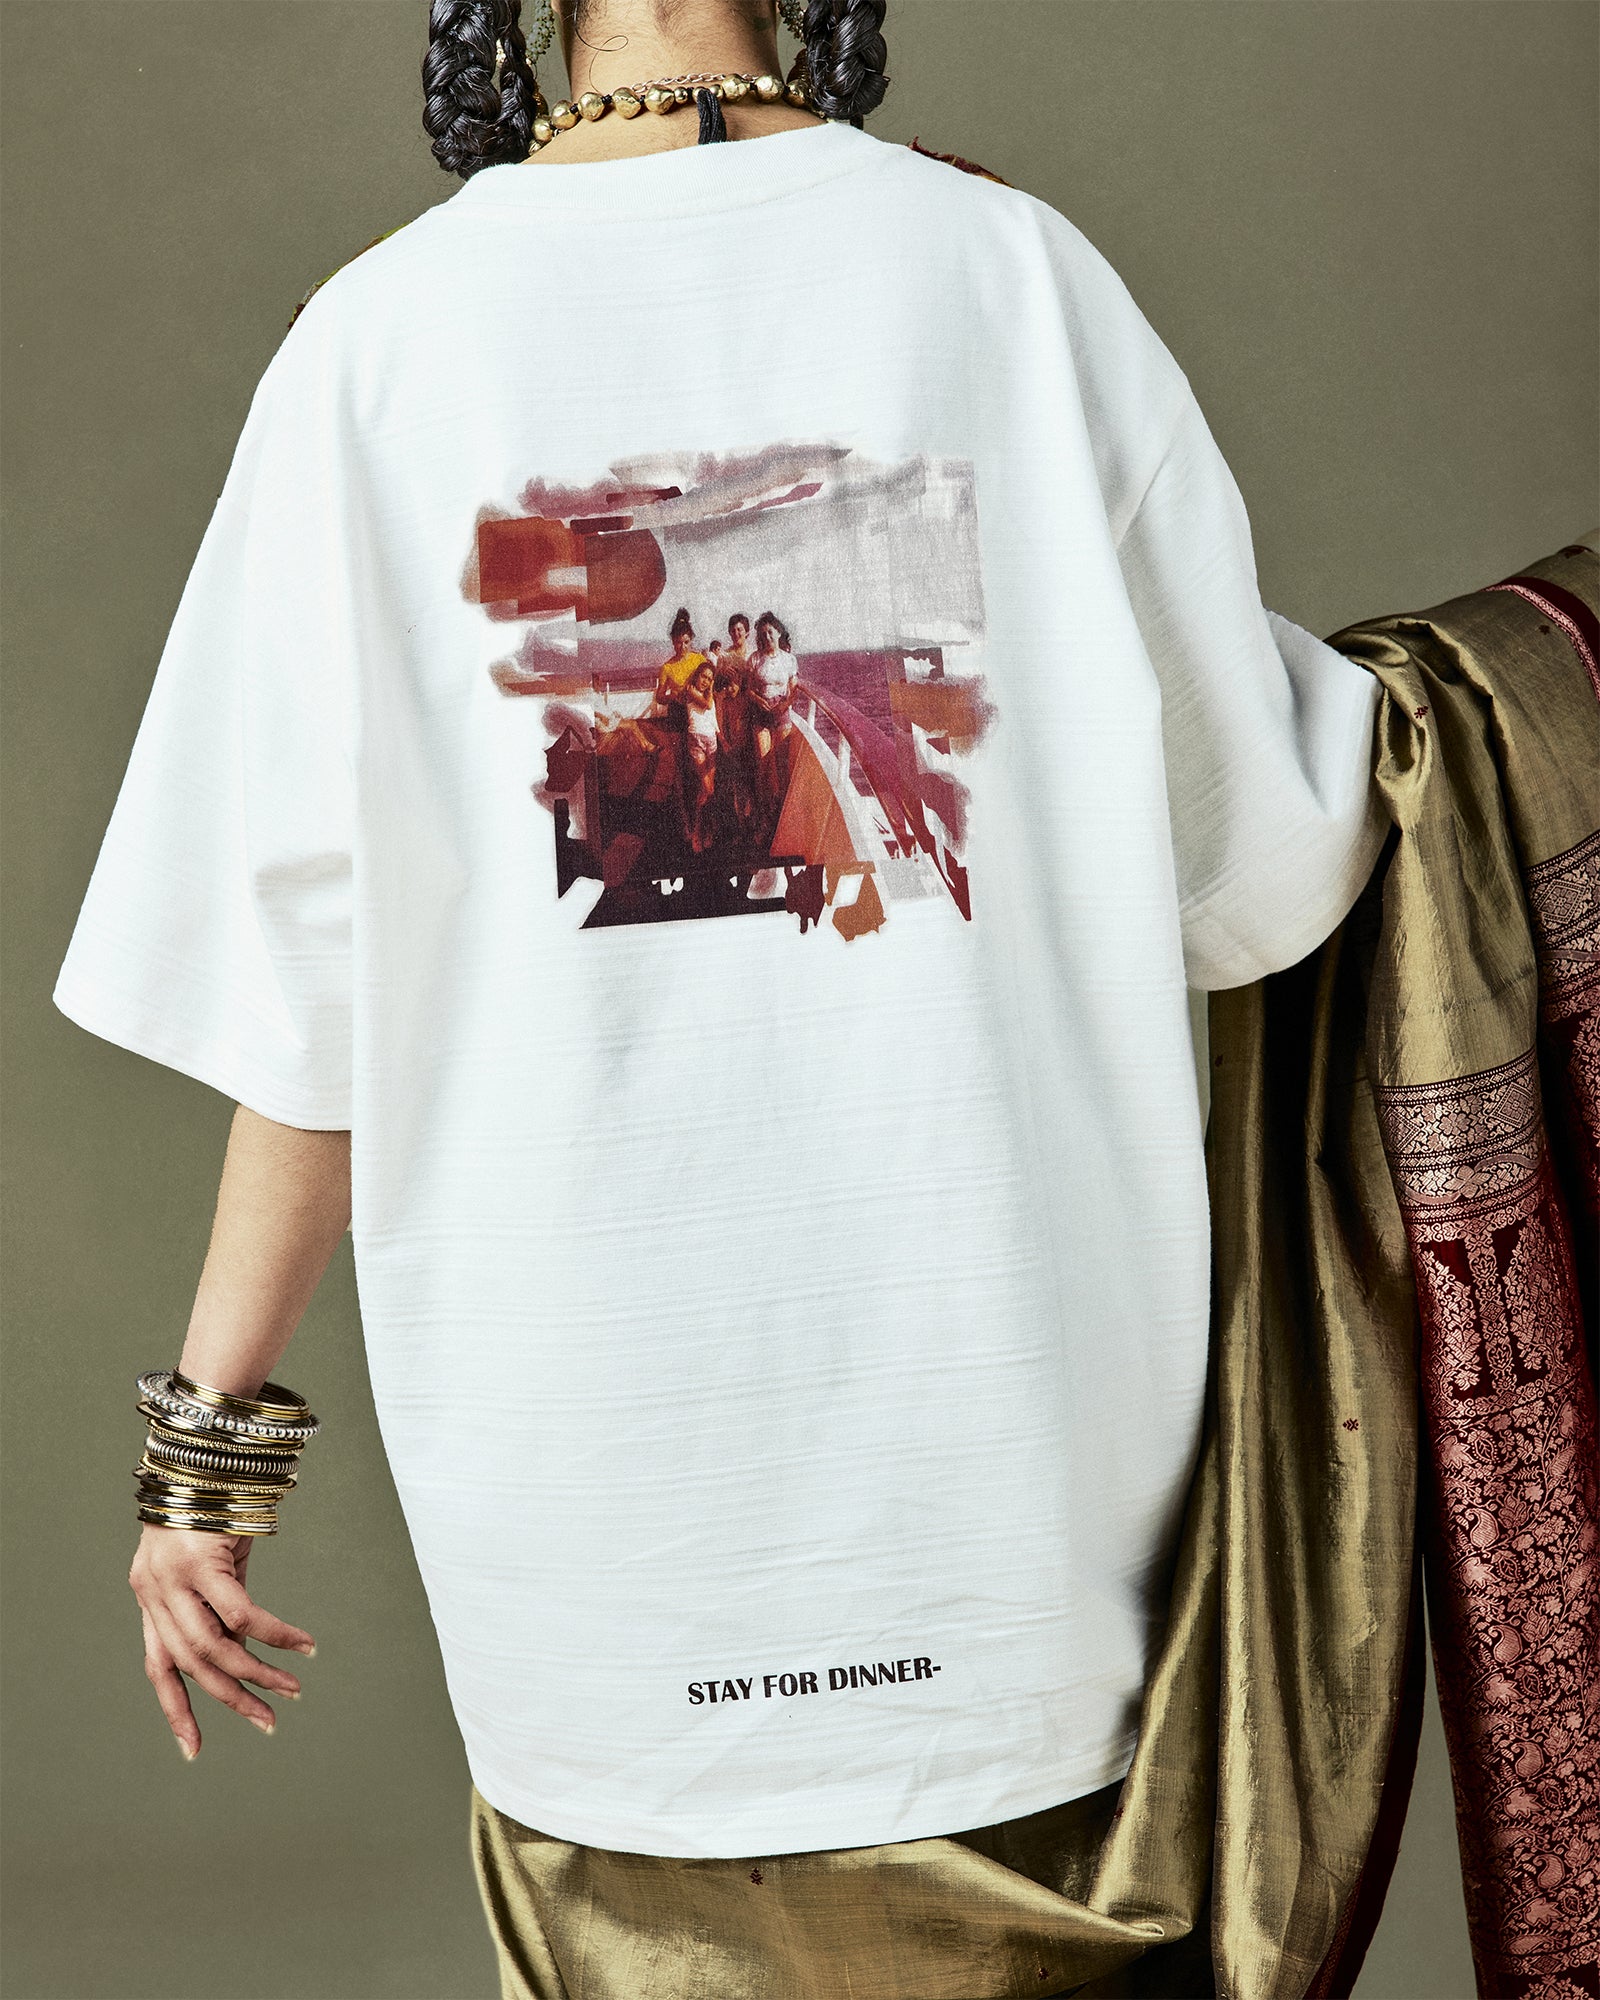 Oversized Quinto T-Shirt portraying traditions and new stories with a 'Calabria-Sicilia' theme - designed with organic Tamil Nadu cotton and up-cycled Mumbai saree trimmings.